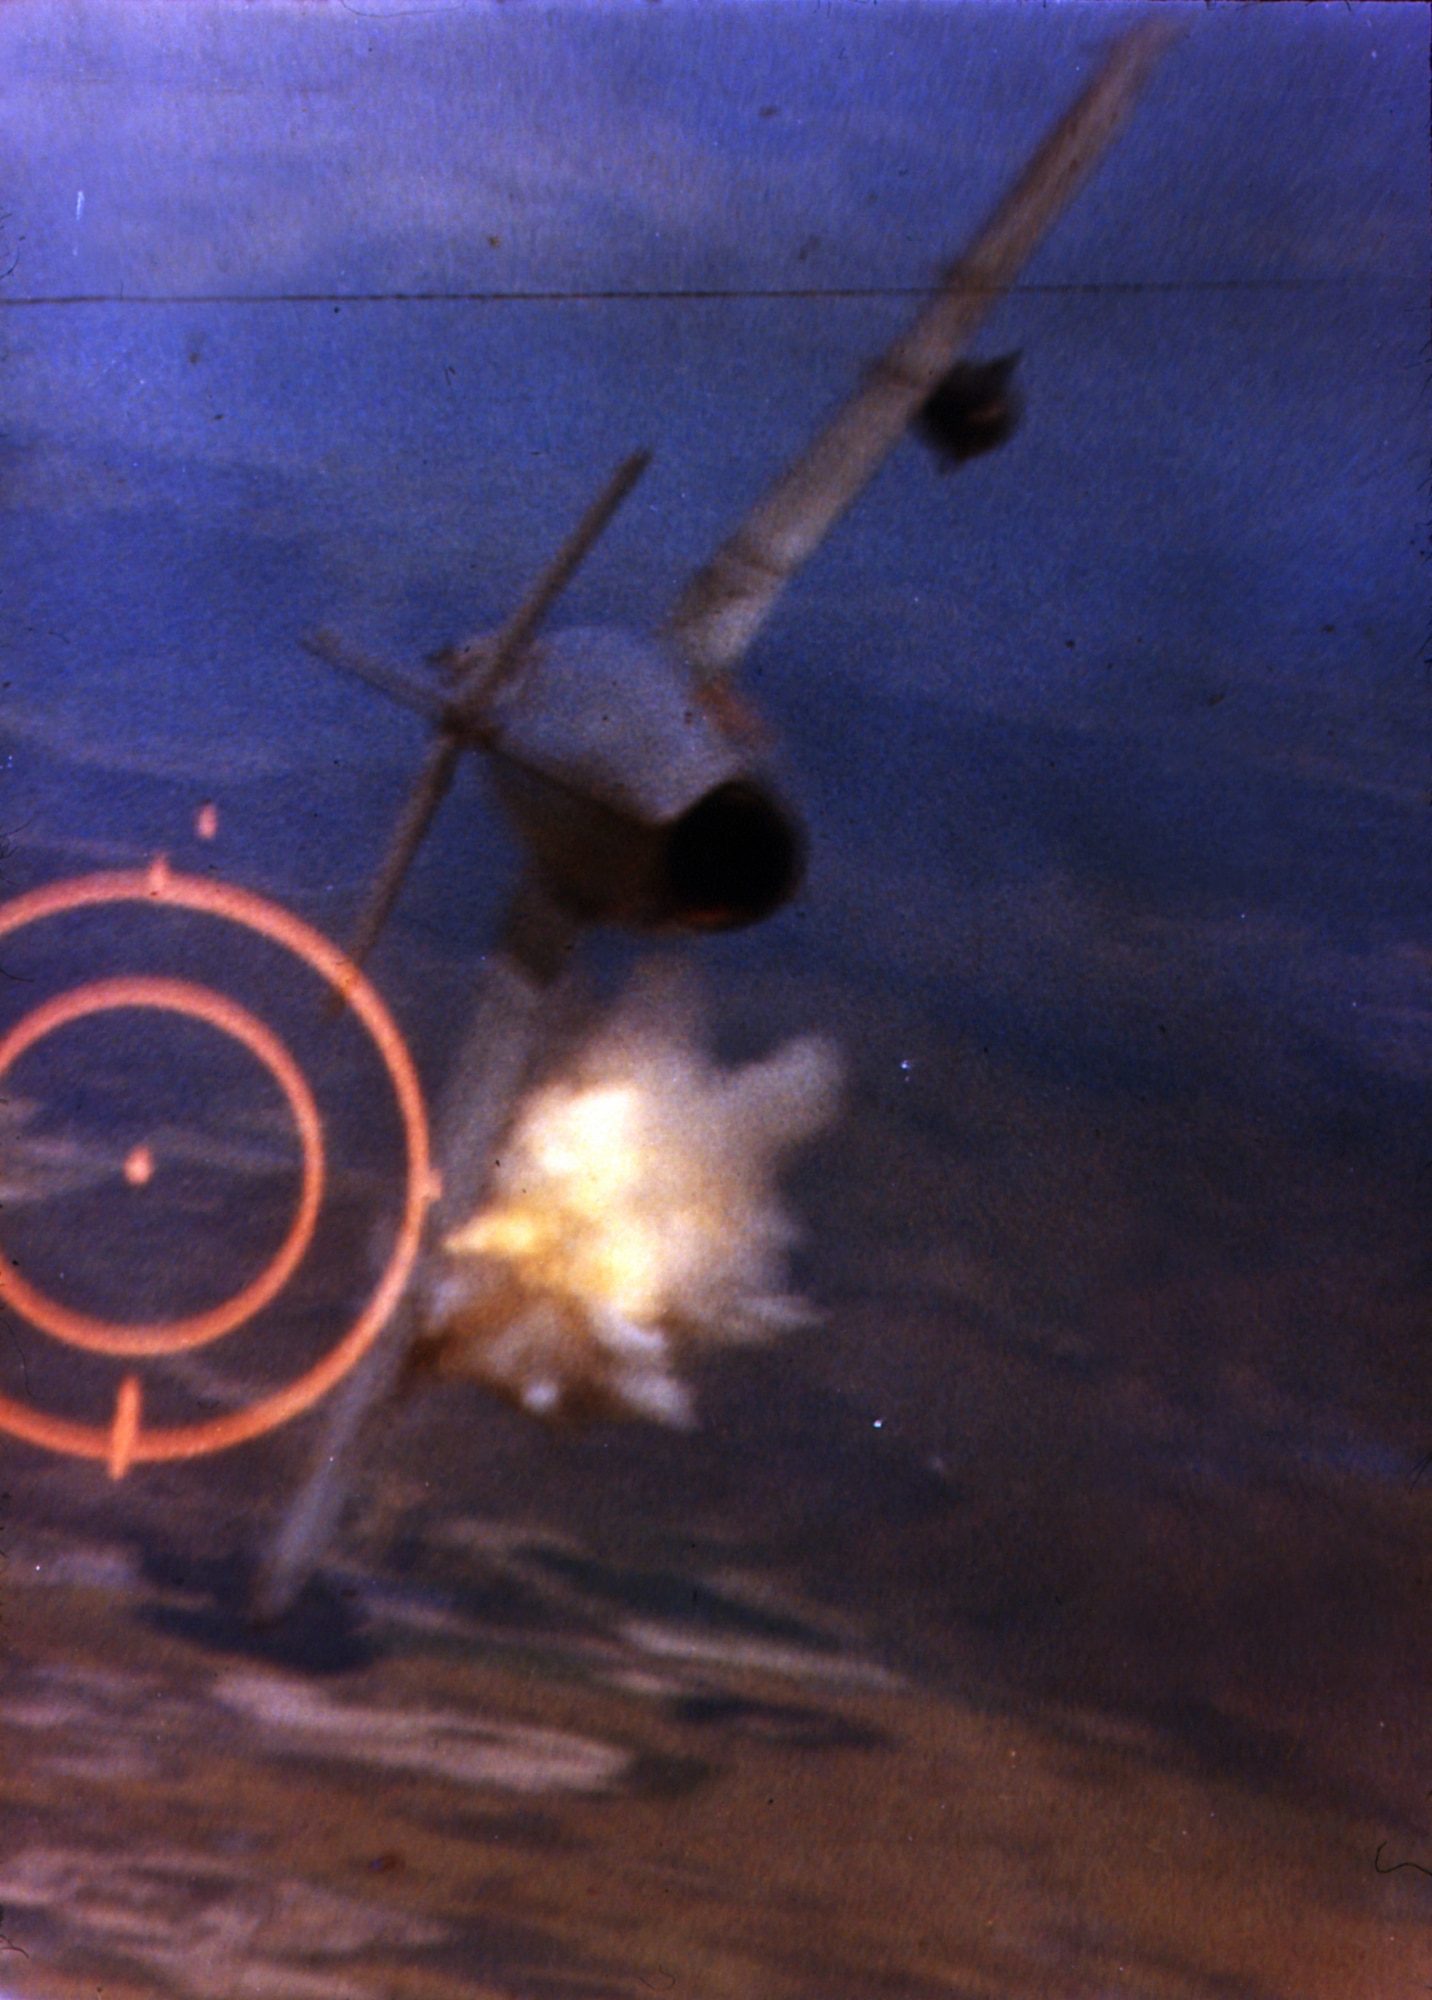 A North Vietnamese Mikoyan-Gurevich MiG-17 is hit by 20 mm shells from a U.S. Air Force Republic F-105D Thunderchief piloted by Major Ralph Kuster Jr. from the 469th Tactical Fighter Squadron, 388th Tactical Figther Wing, on 3 June 1967. (U.S. Air Force photo)